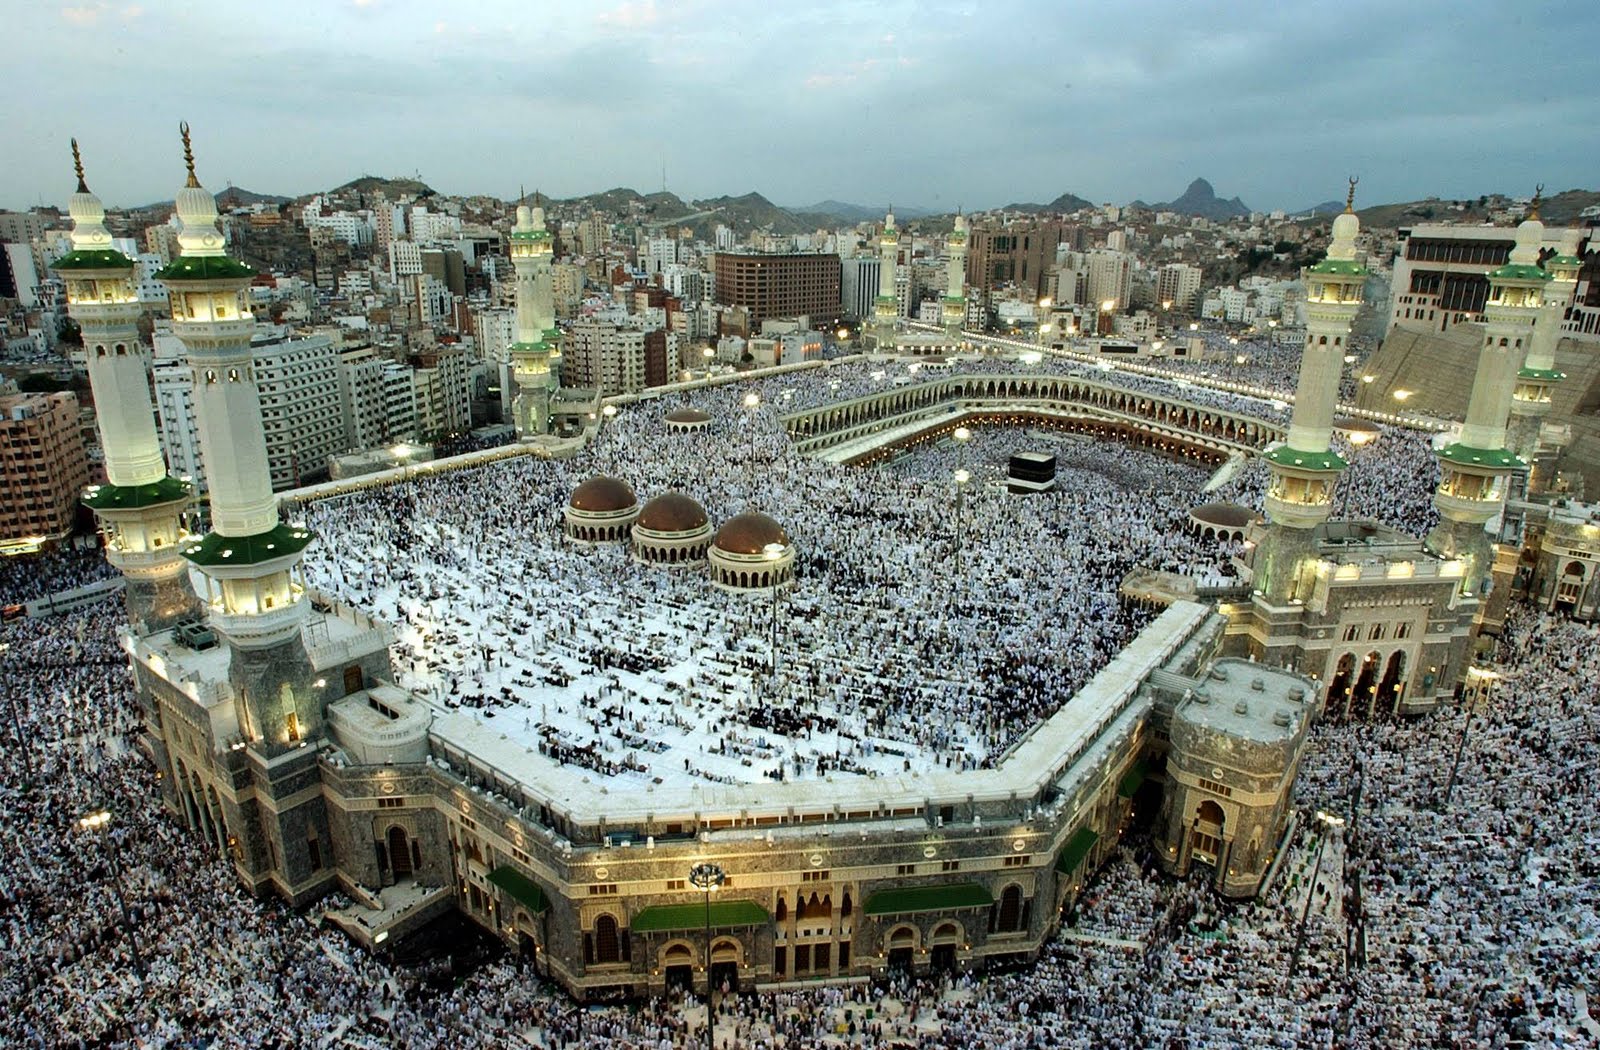 Mecca  Holly Place Of Saudi Arabia  Travel And Tourism